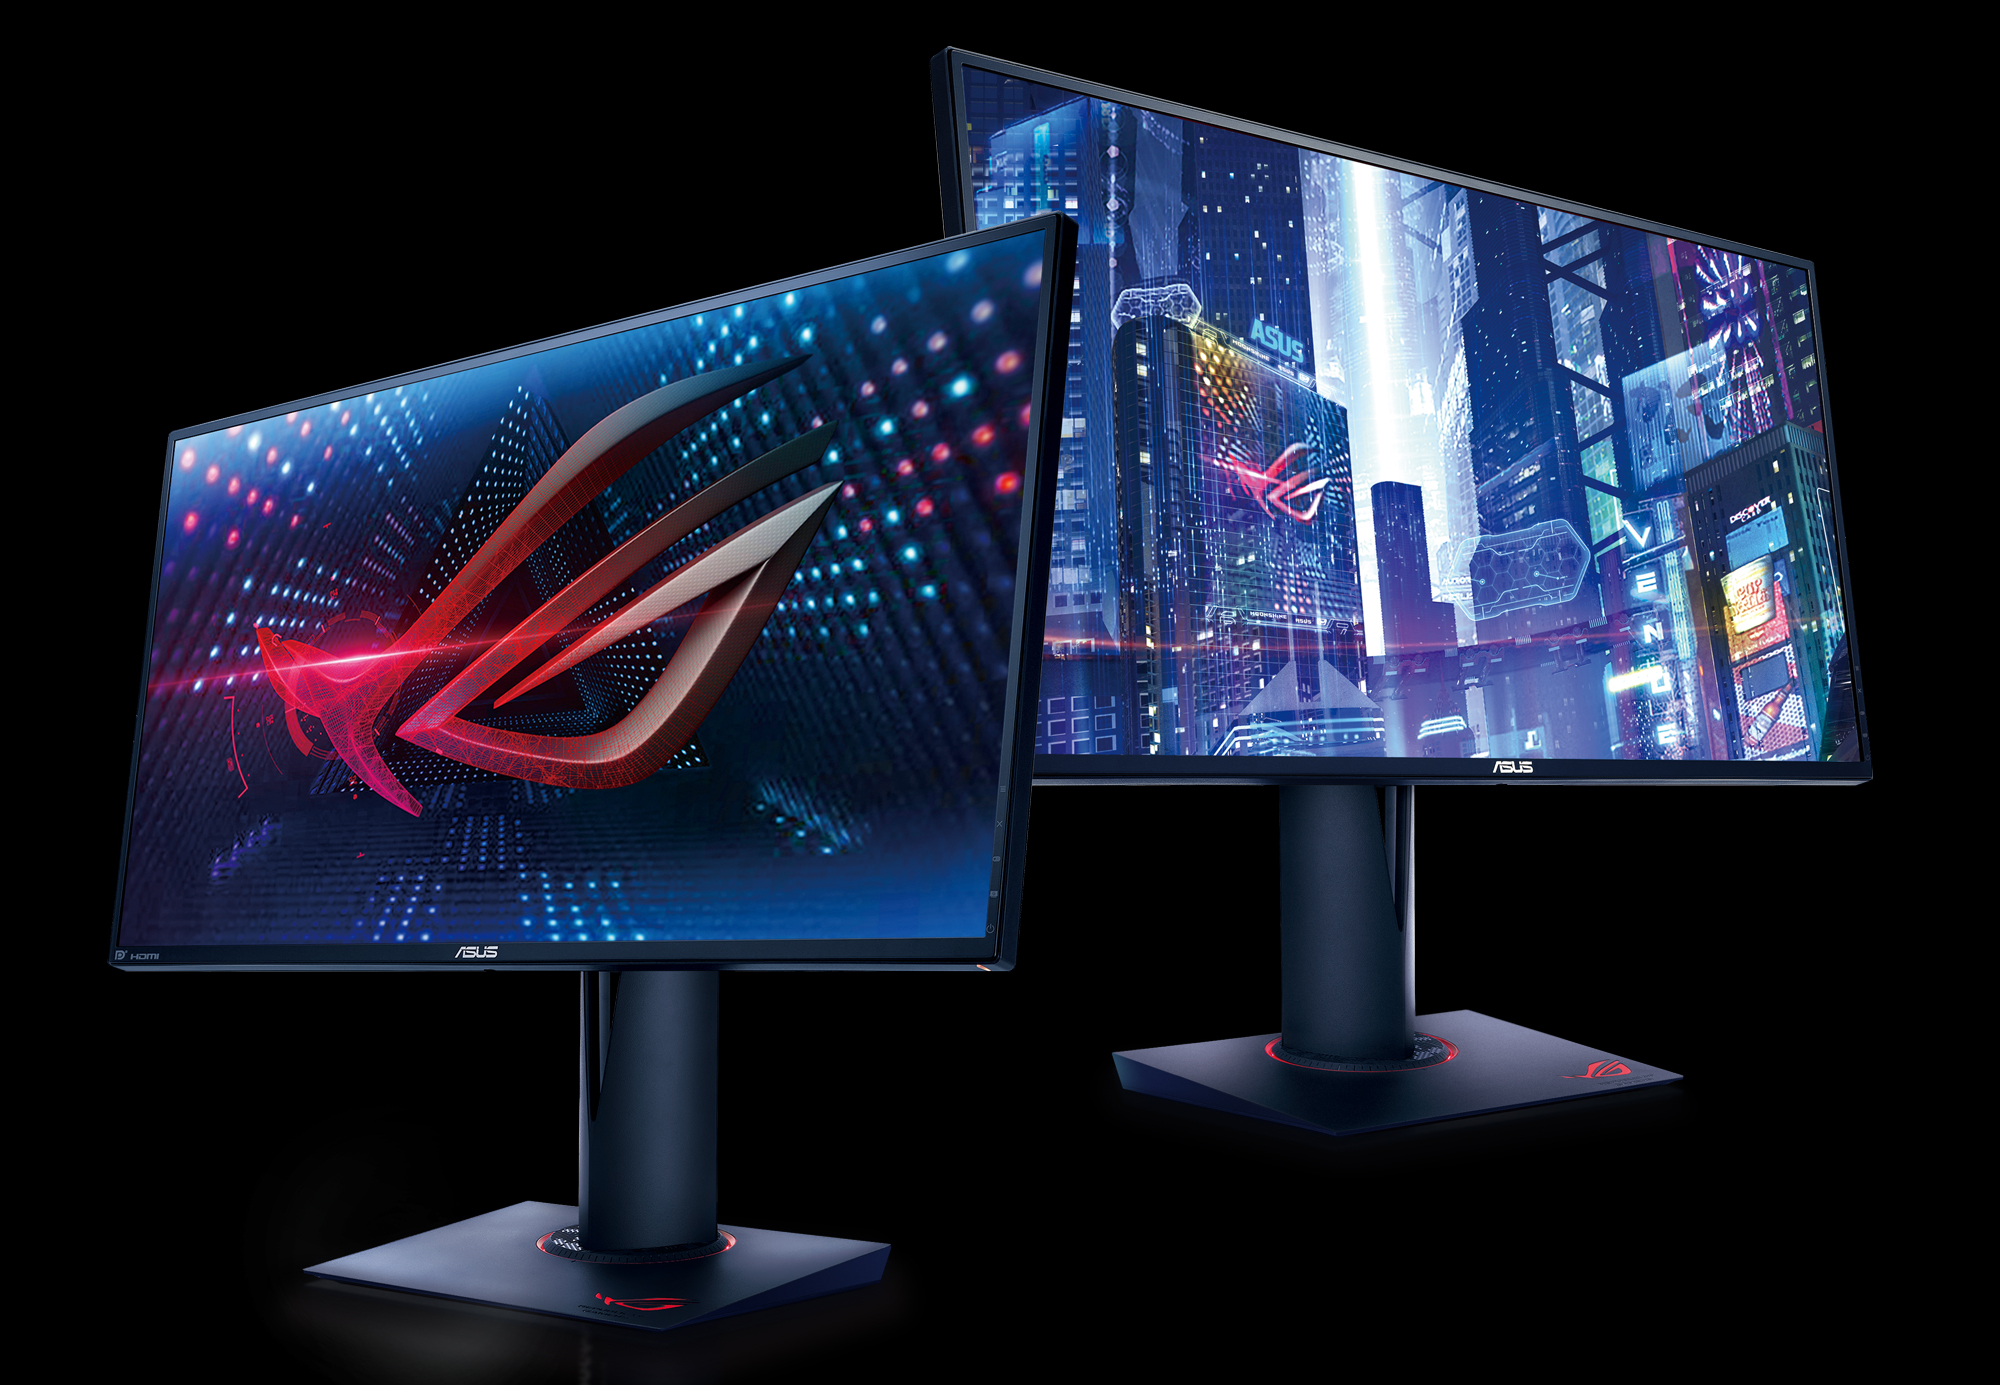 Media asset in full size related to 3dfxzone.it news item entitled as follows: ASUS lancia i monitor gaming-oriented ROG Swift PG279Q e Swift PG27AQ | Image Name: news23257_ASUS-ROG-Swift-PG279Q-PG27AQ_1.jpg